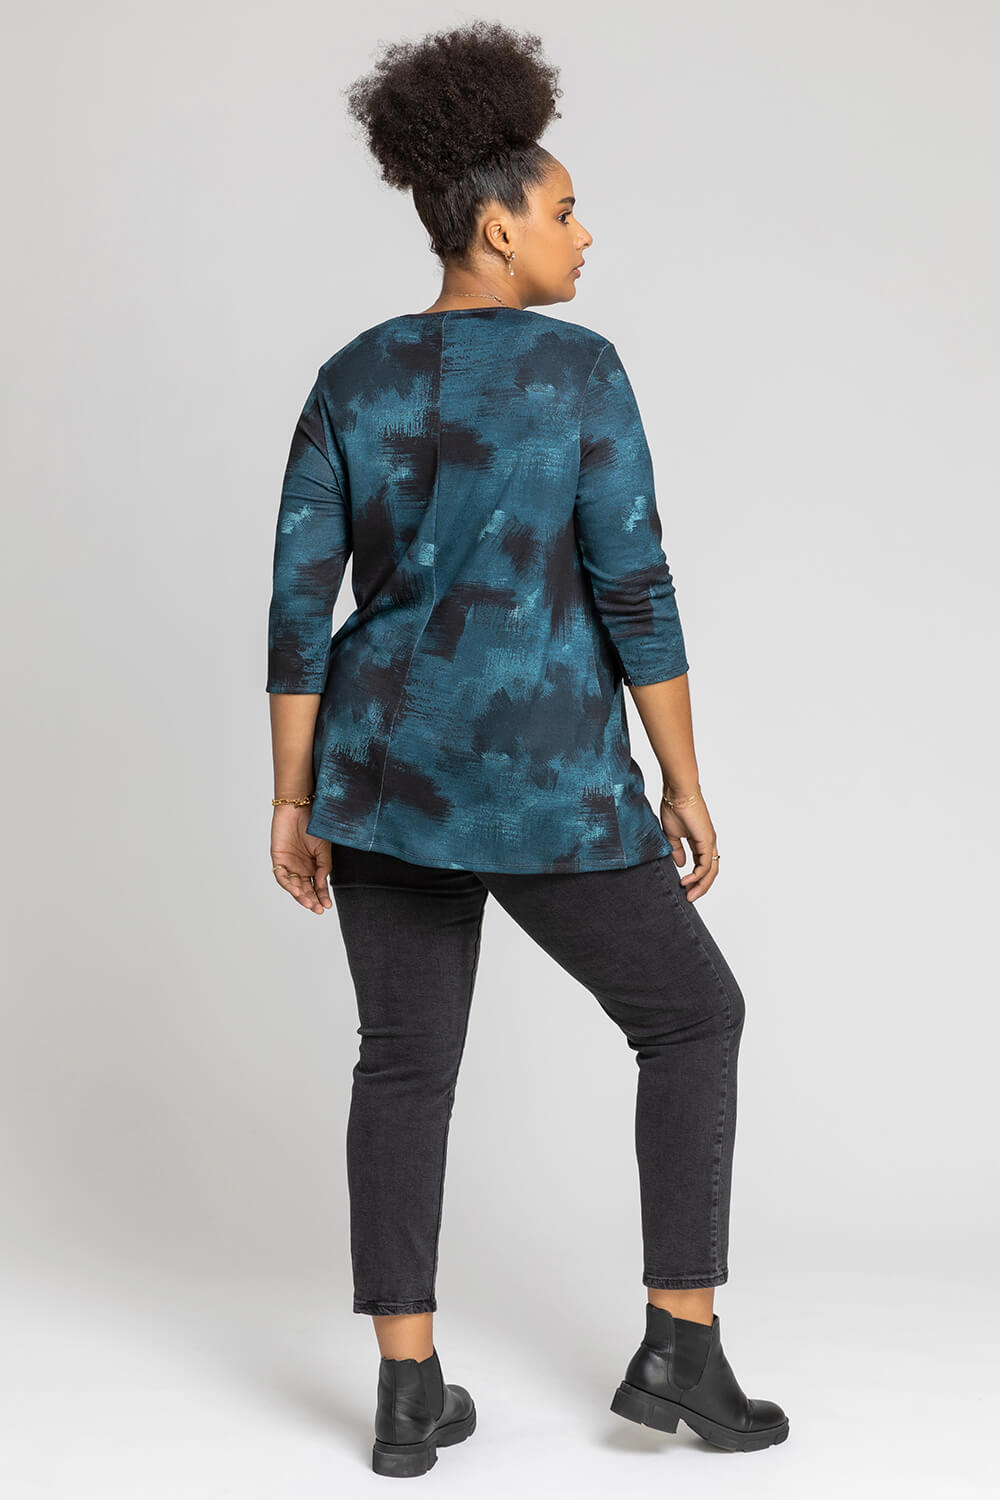 Teal Curve Abstract Print Pocket Top, Image 2 of 5